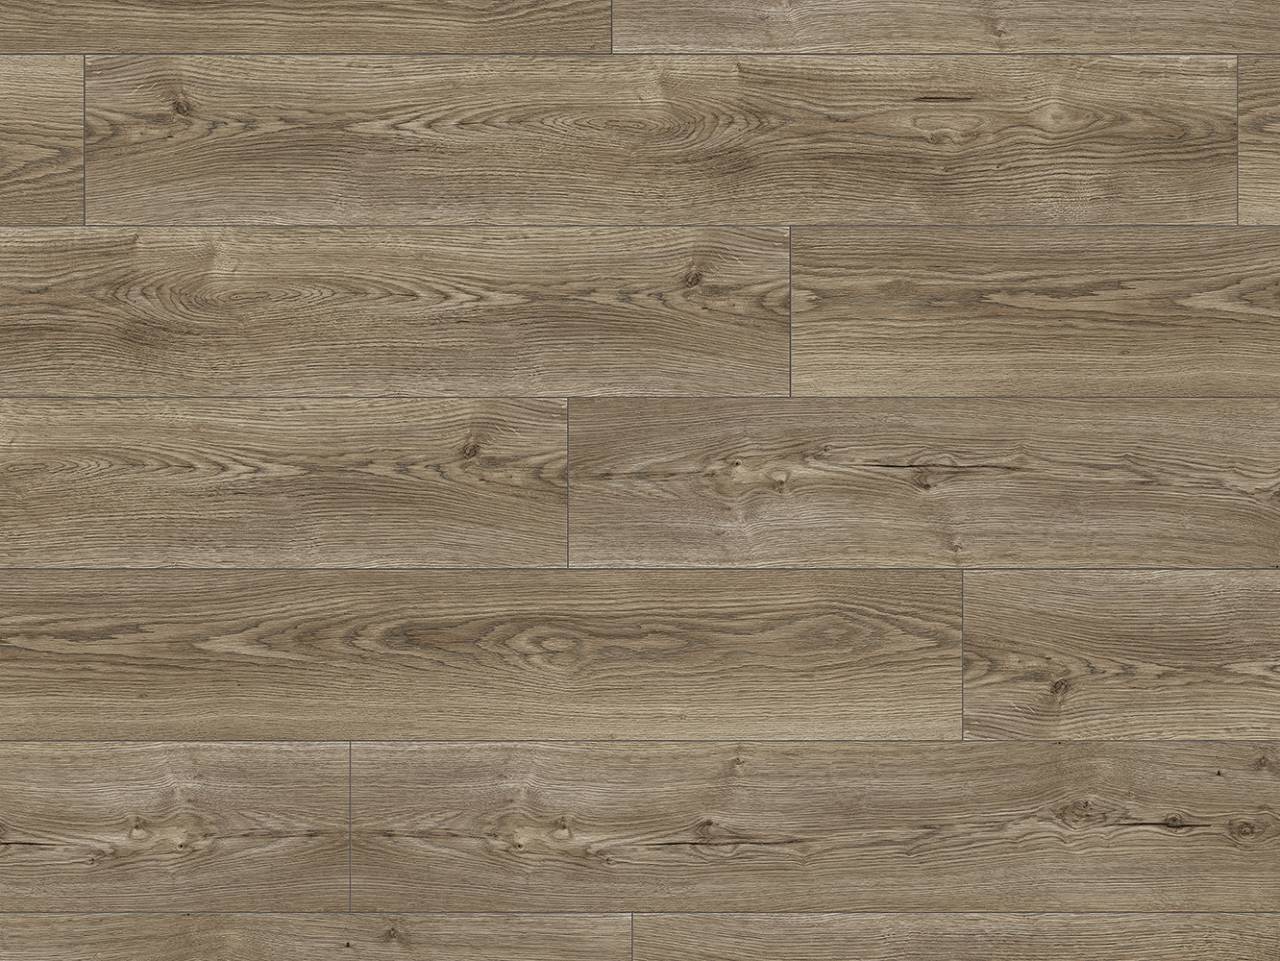 Close-up of 'K482 Twiling Sterling Oak' flooring highlighting detailed grain patterns and twilight-inspired silver-gray hues.